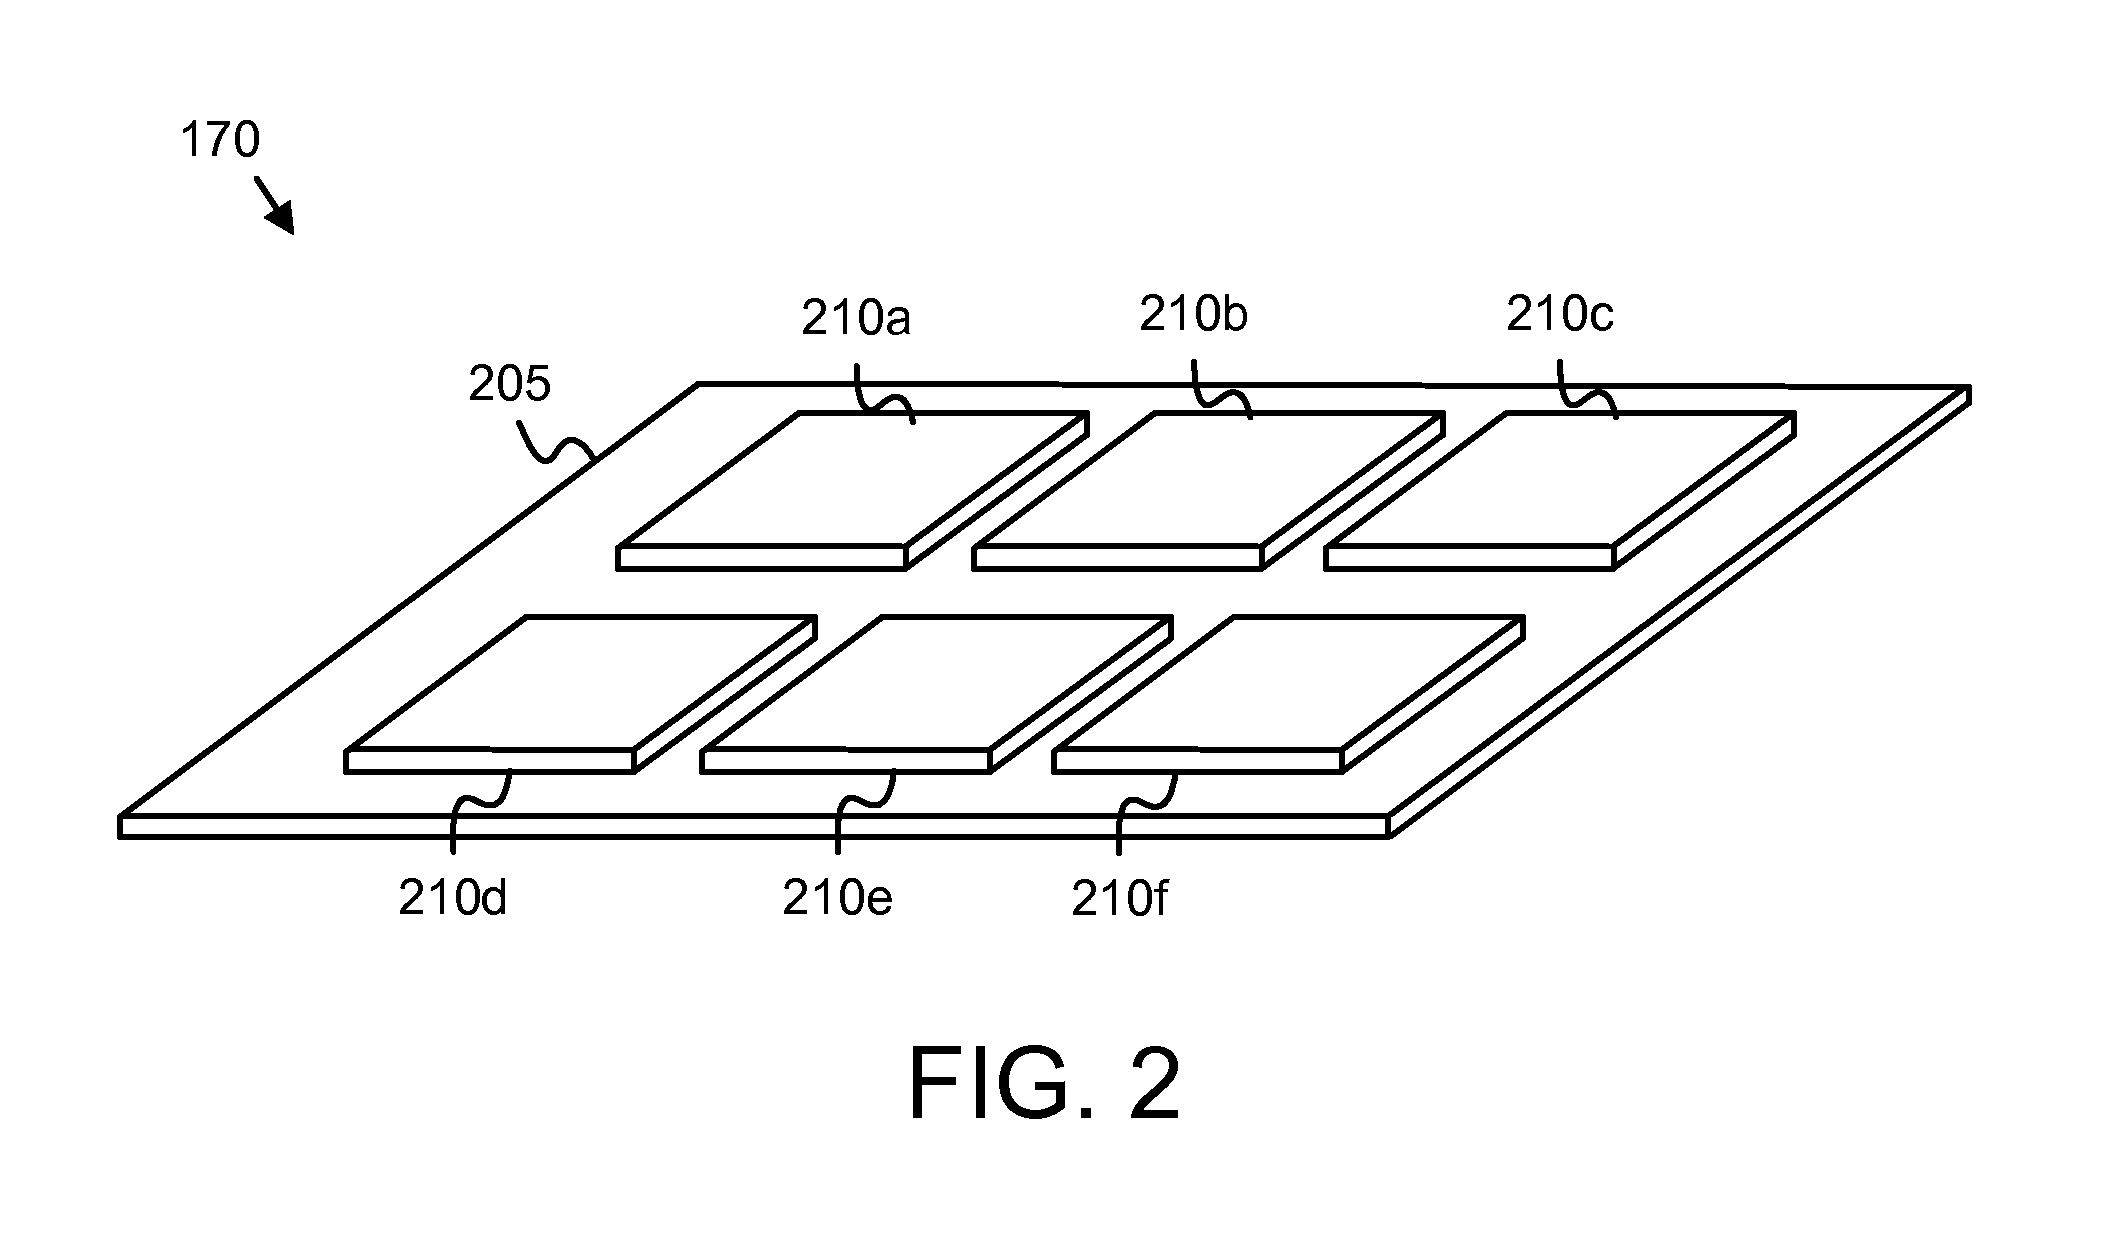 Apparatus, system, and method for migrating wear spots